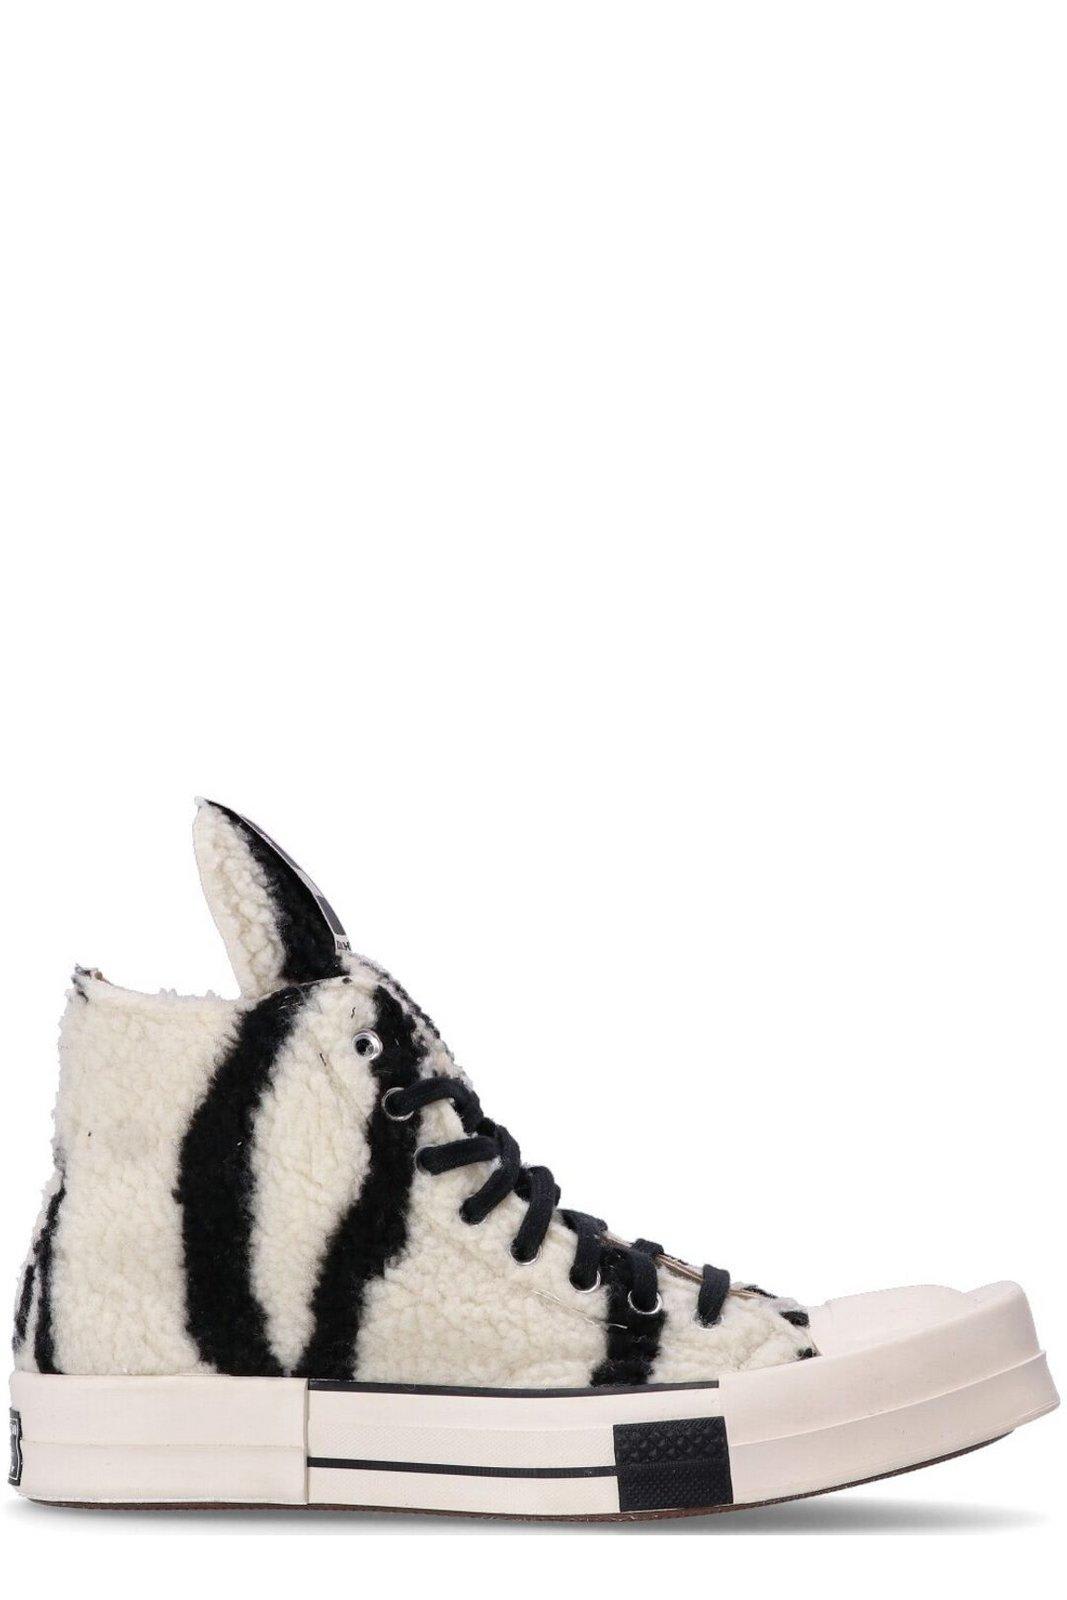 RICK OWENS X CONVERSE TURBODRK LACE-UP SNEAKERS